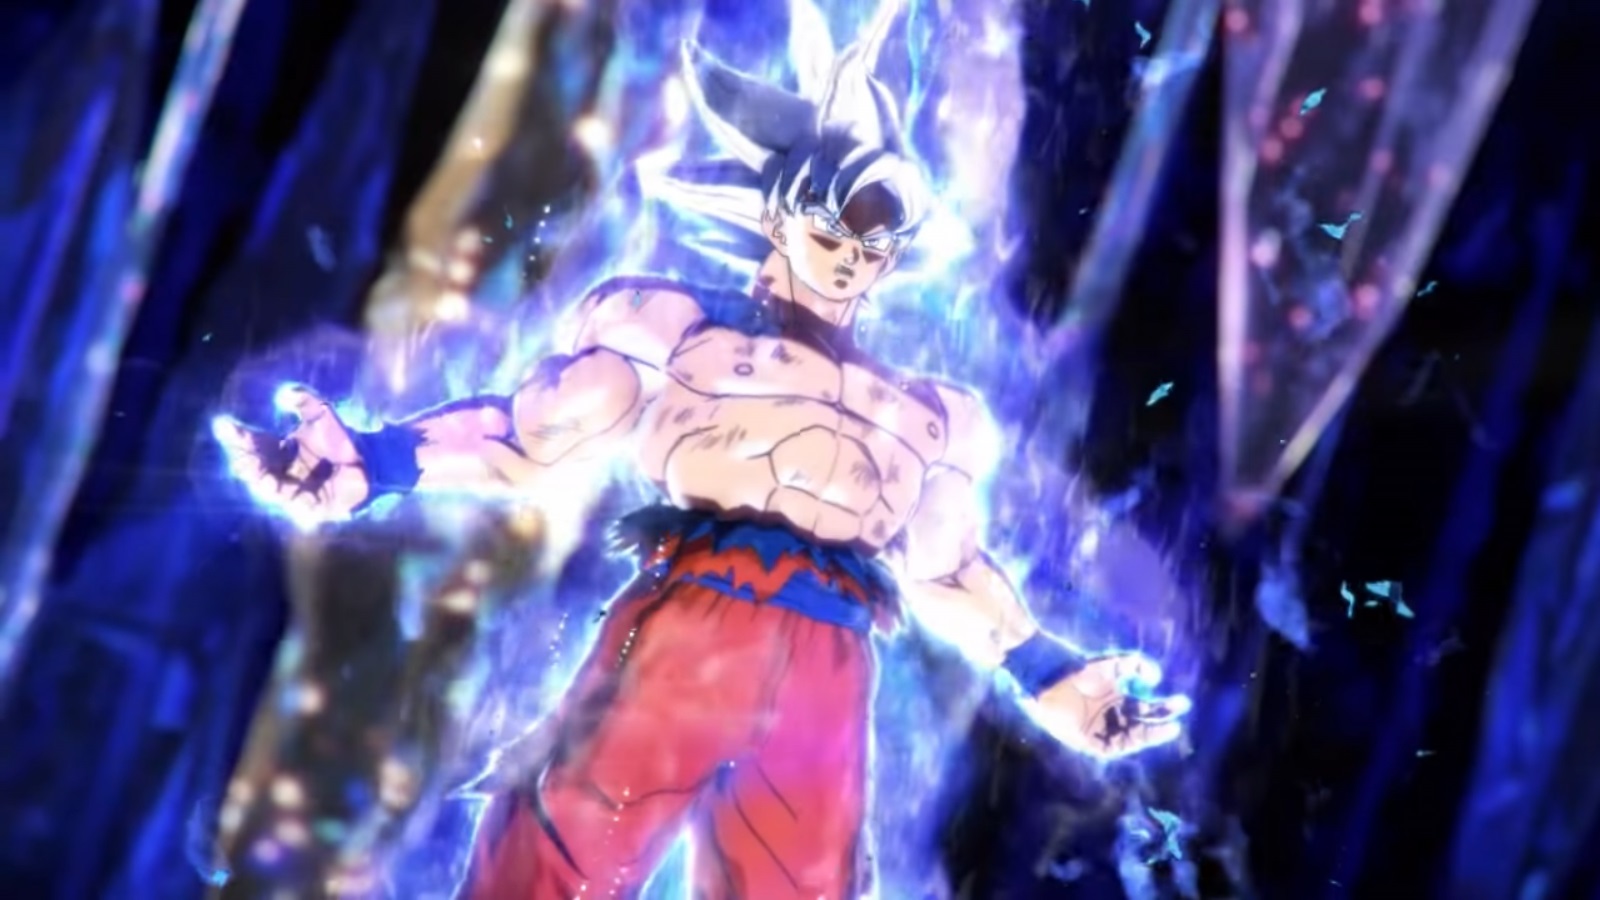 Dragon Ball Xenoverse 2 - DB Super Pack 4 Details, Videos, and Release Date